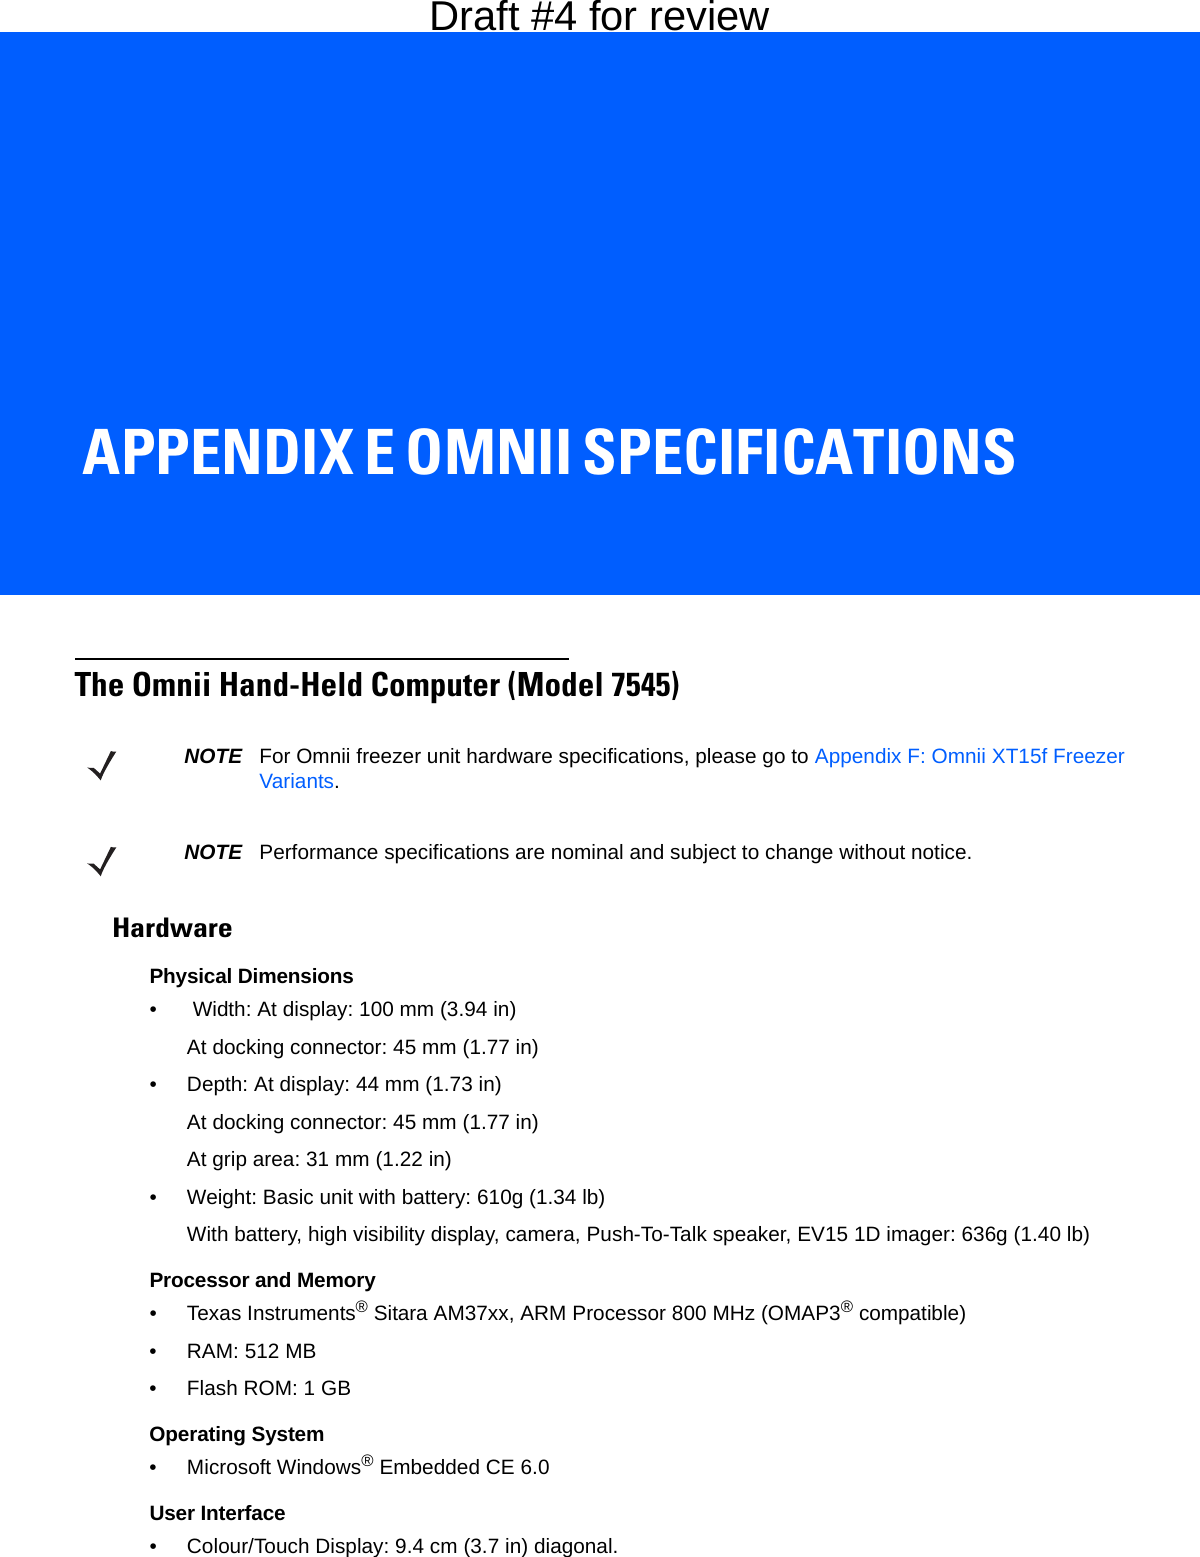 APPENDIX E OMNII SPECIFICATIONSEOmnii SpecificationsThe Omnii Hand-Held Computer (Model 7545)HardwarePhysical Dimensions•  Width: At display: 100 mm (3.94 in)At docking connector: 45 mm (1.77 in)• Depth: At display: 44 mm (1.73 in)At docking connector: 45 mm (1.77 in)At grip area: 31 mm (1.22 in)• Weight: Basic unit with battery: 610g (1.34 lb)With battery, high visibility display, camera, Push-To-Talk speaker, EV15 1D imager: 636g (1.40 lb)Processor and Memory• Texas Instruments® Sitara AM37xx, ARM Processor 800 MHz (OMAP3® compatible)• RAM: 512 MB• Flash ROM: 1 GBOperating System• Microsoft Windows® Embedded CE 6.0User Interface• Colour/Touch Display: 9.4 cm (3.7 in) diagonal.NOTE For Omnii freezer unit hardware specifications, please go to Appendix F: Omnii XT15f Freezer Variants.NOTE Performance specifications are nominal and subject to change without notice.Draft #4 for review